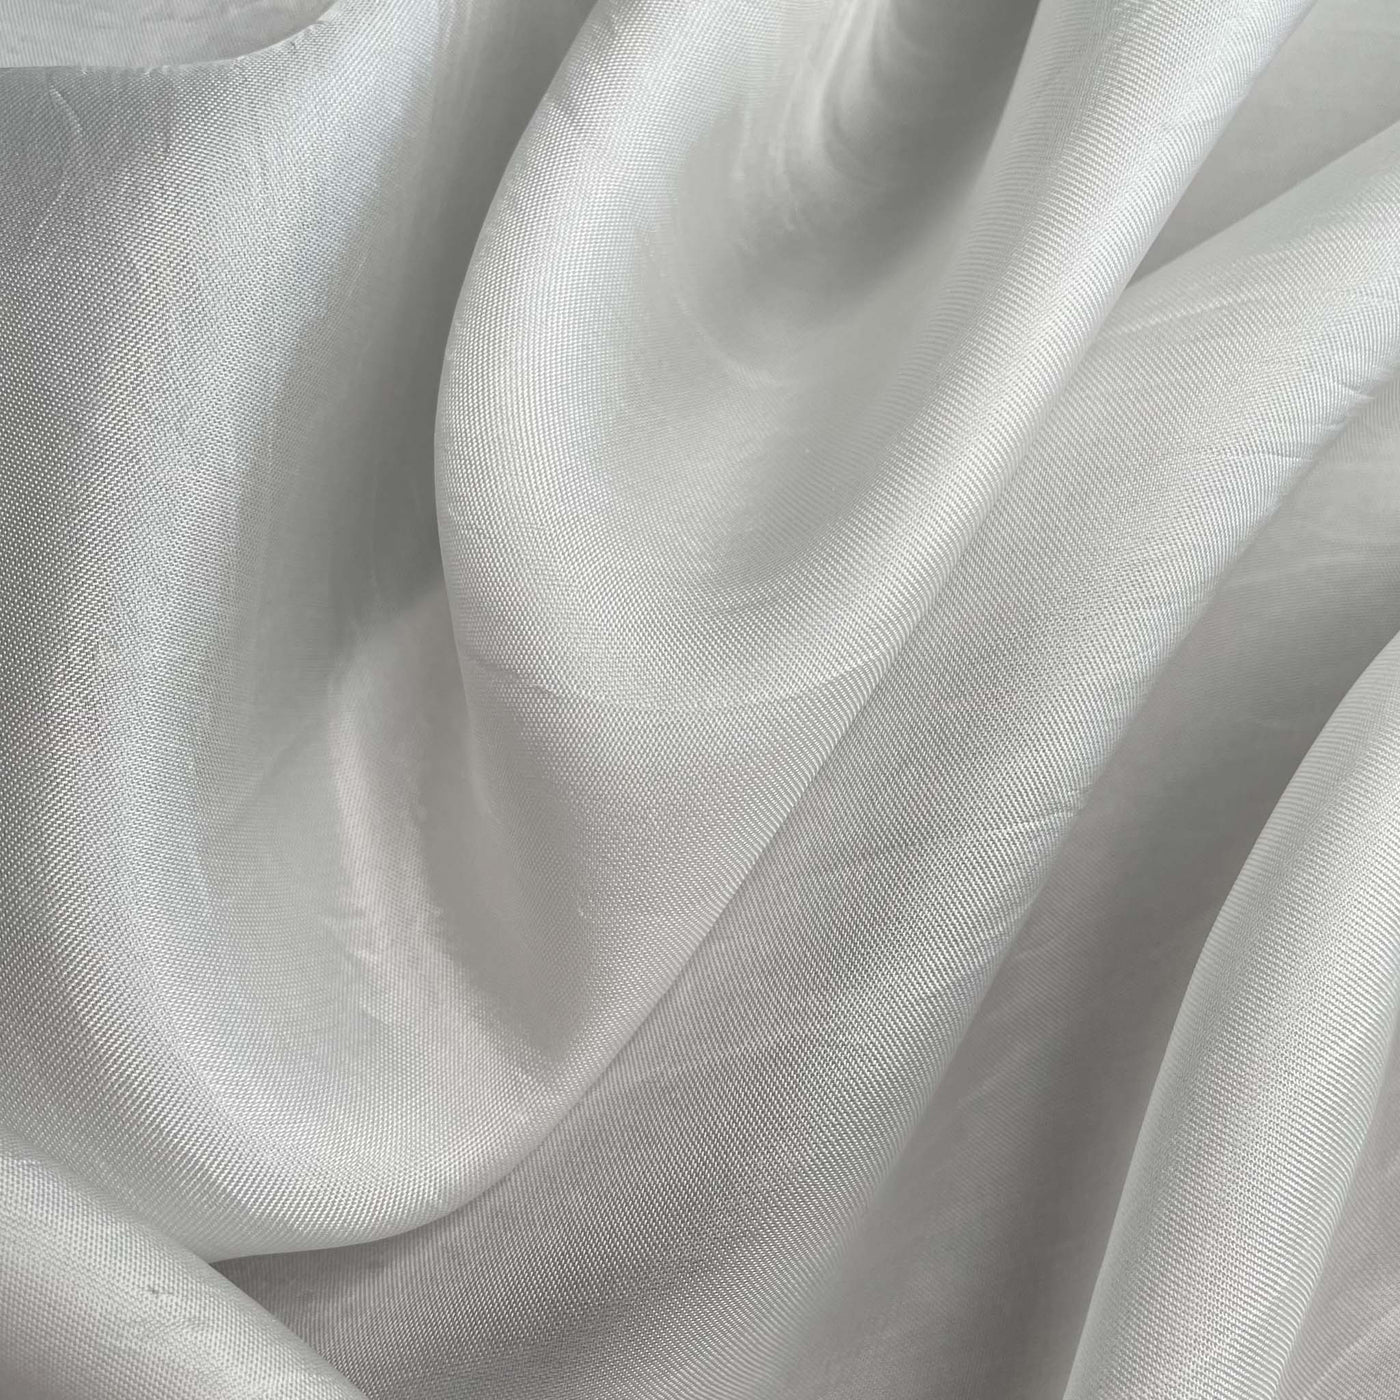 Fabric Pandit Fabric White Dyeable Pure Bemberg Fine Satin Plain Fabric (Width 44 Inches, 95 Gms)